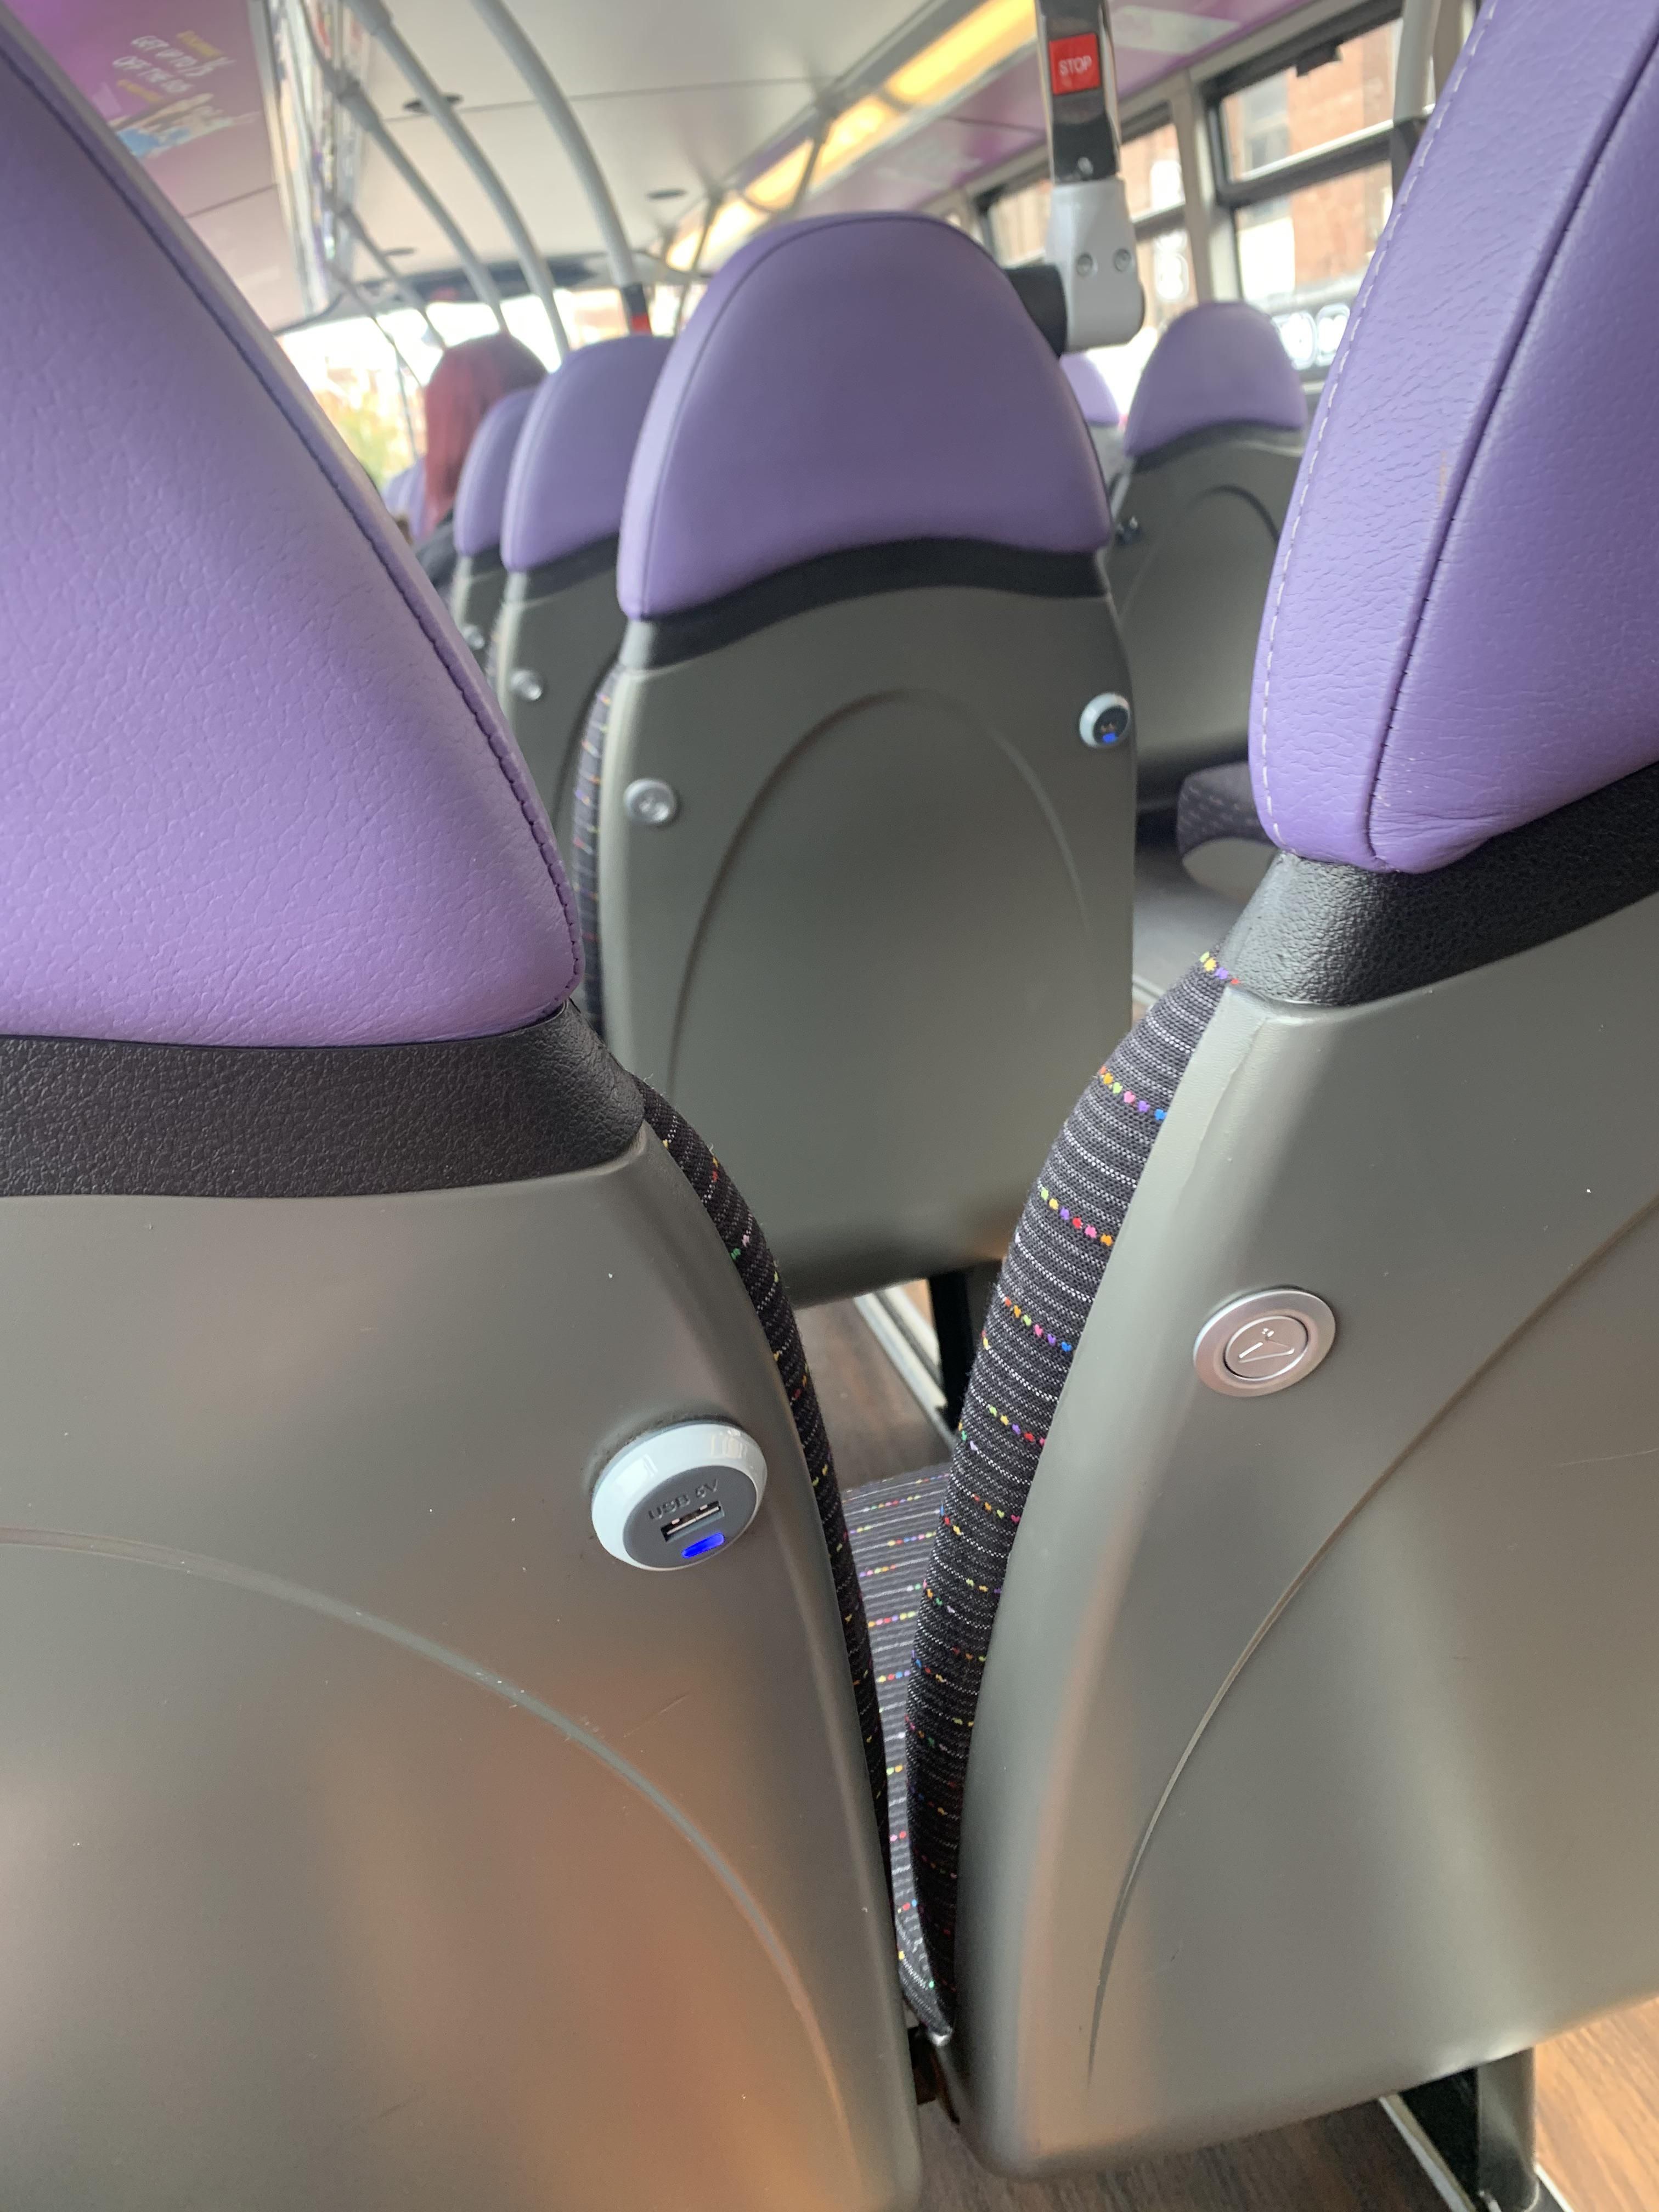 Sitting on the bus and noticing the seats look like sad penises.